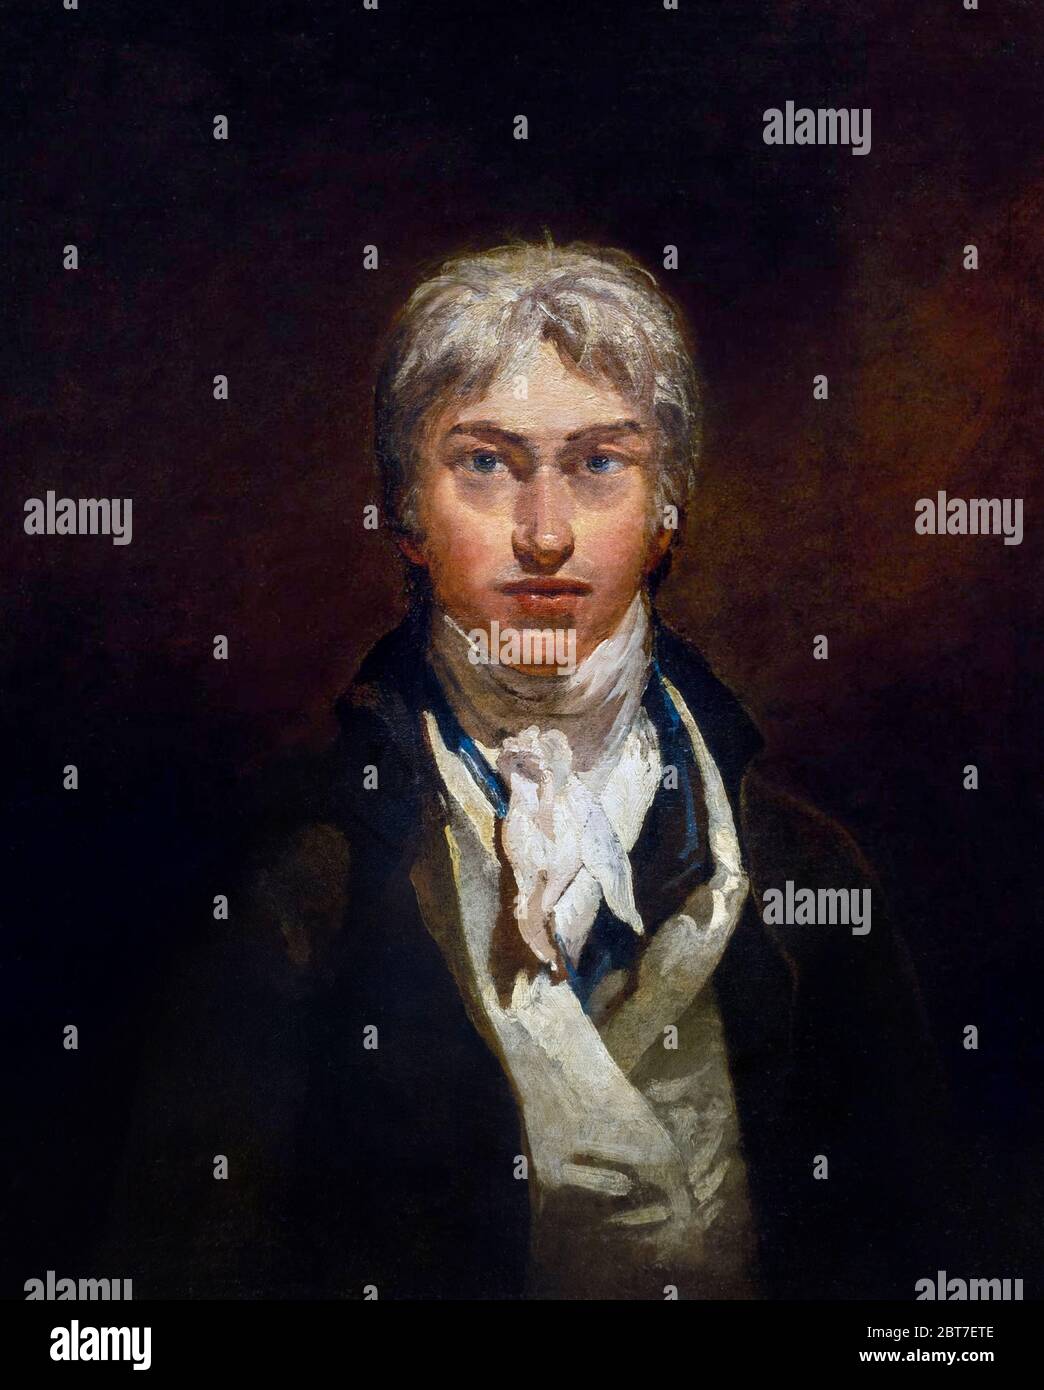 JMW Turner, portrait. Self portrait of the artist Joseph Mallord William Turner (1775-1851) at the age of about 24, oil on canvas, c.1799. Stock Photo